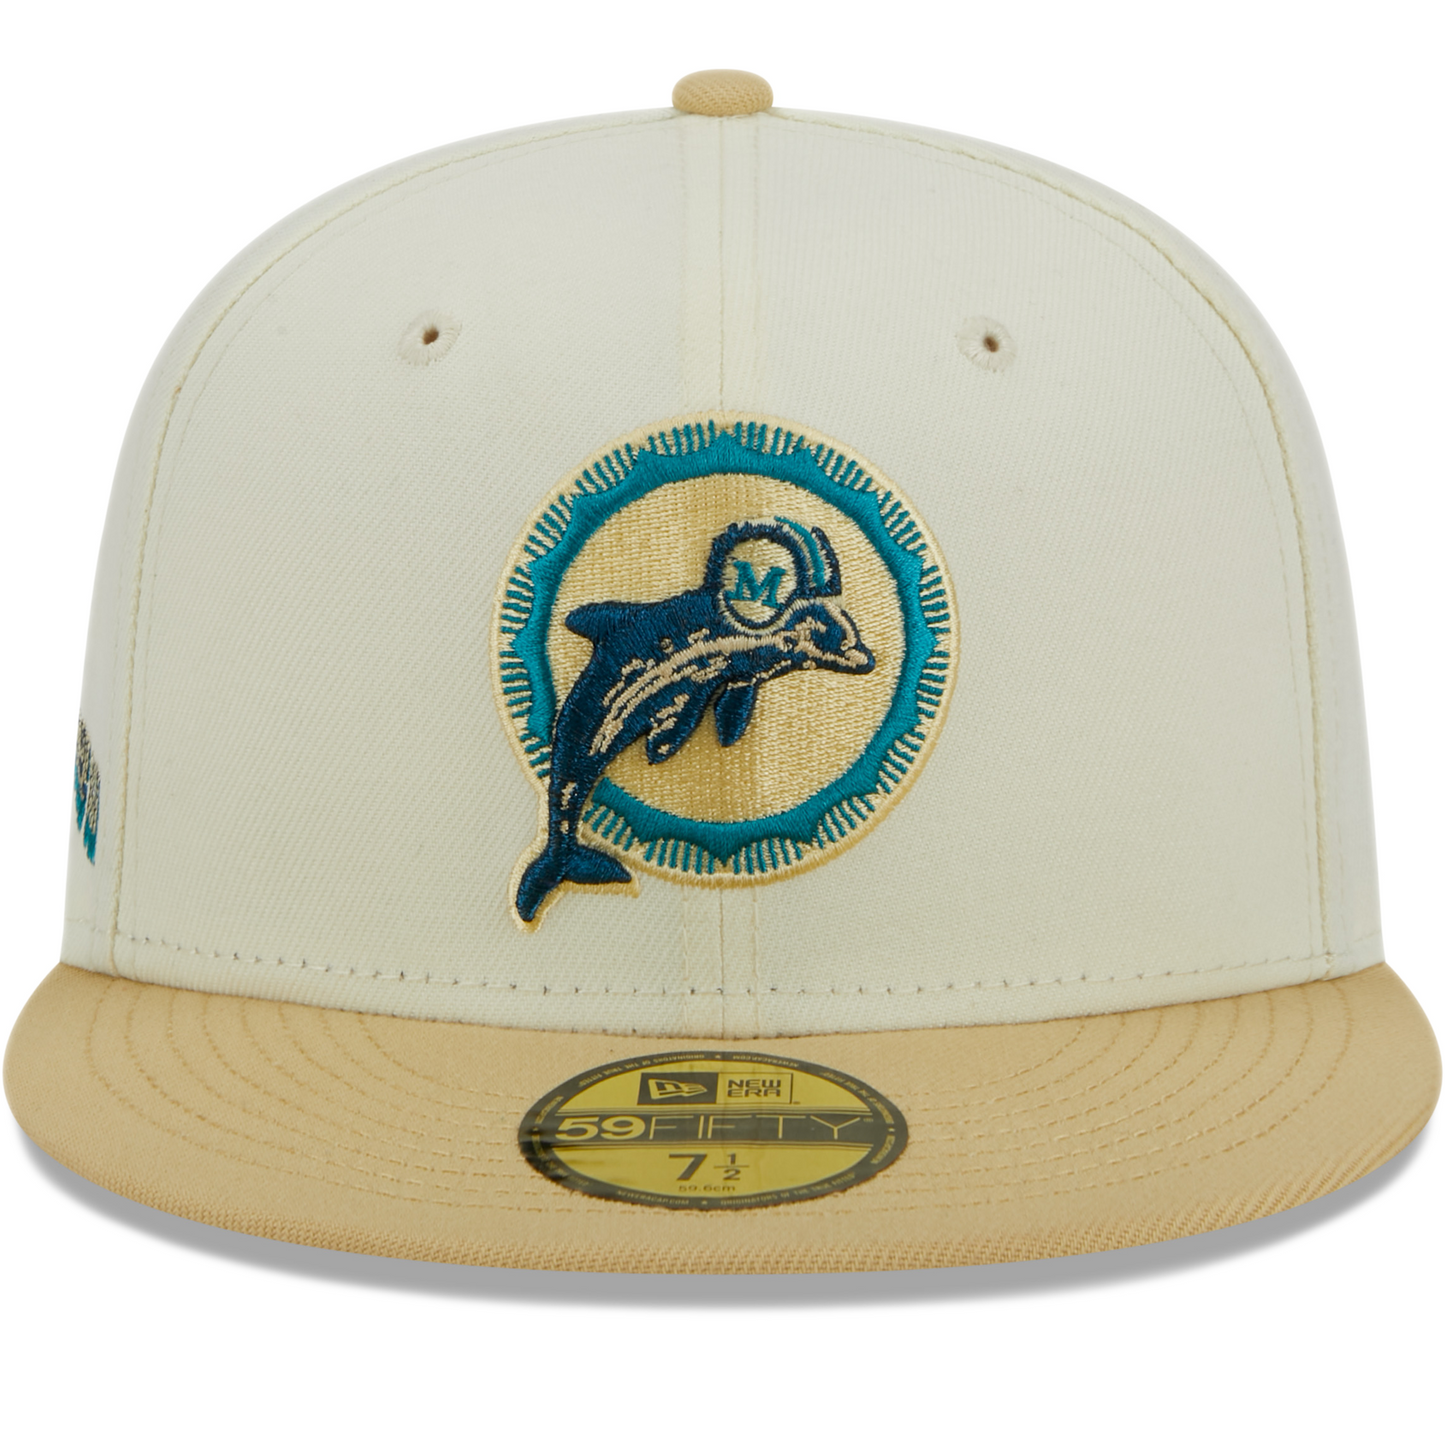 New Era Miami Dolphins City Icon 59FIFTY Fitted Hat - White/ Cream